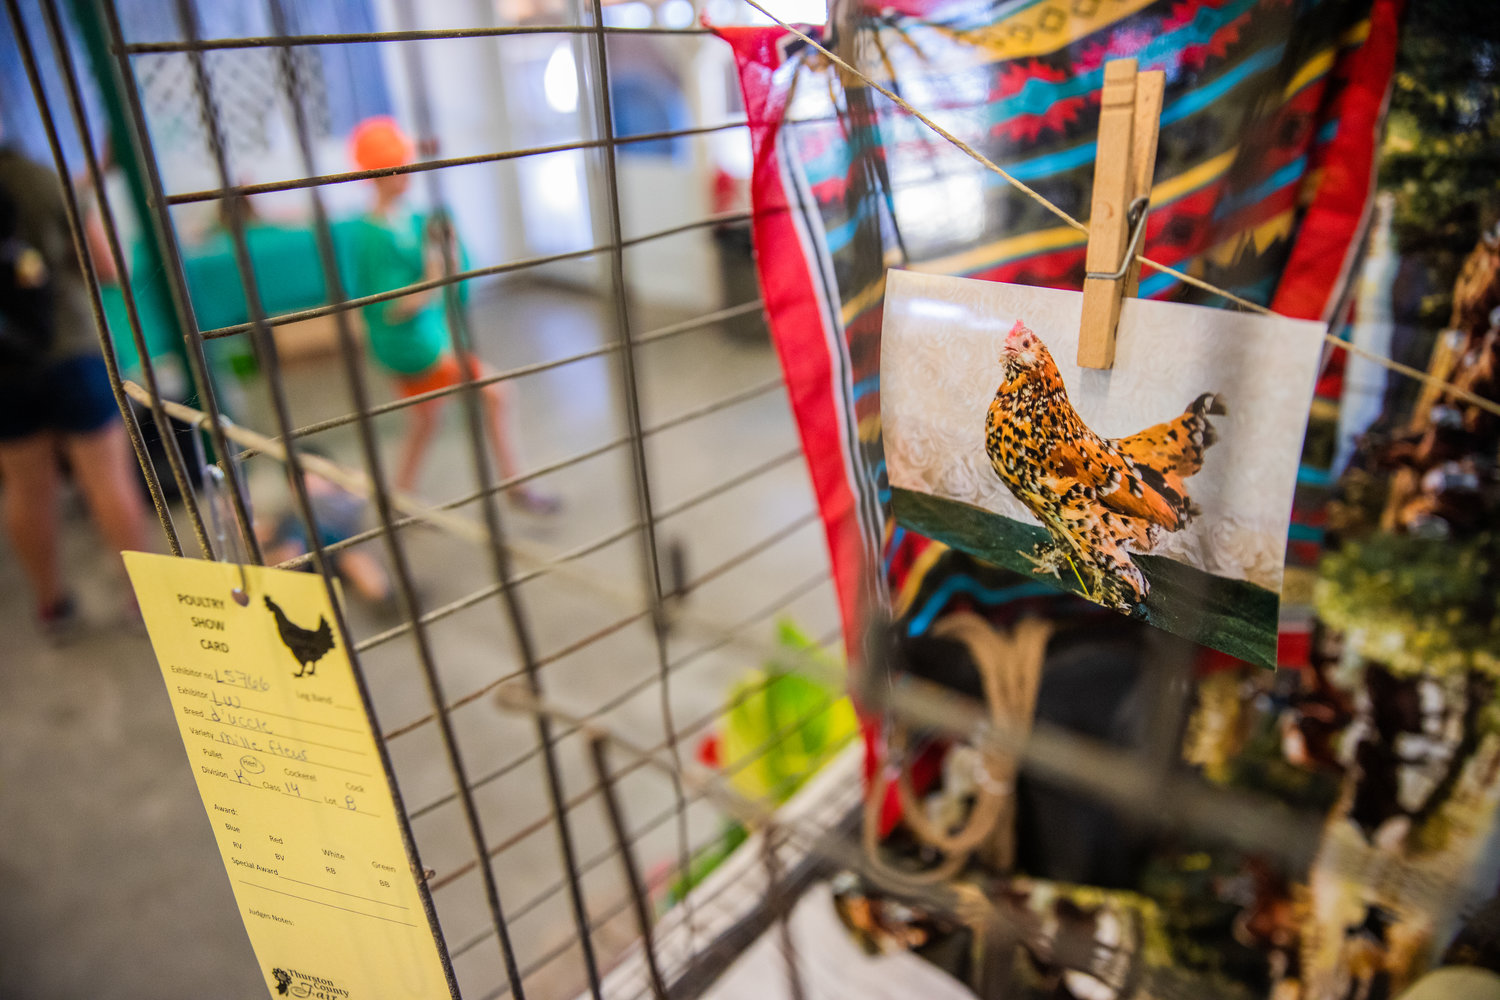 Photos of chickens hang on display inside cages empty of fowl as safety precautions for avian influenza remain in place during the Thurston County Fair on Thursday.